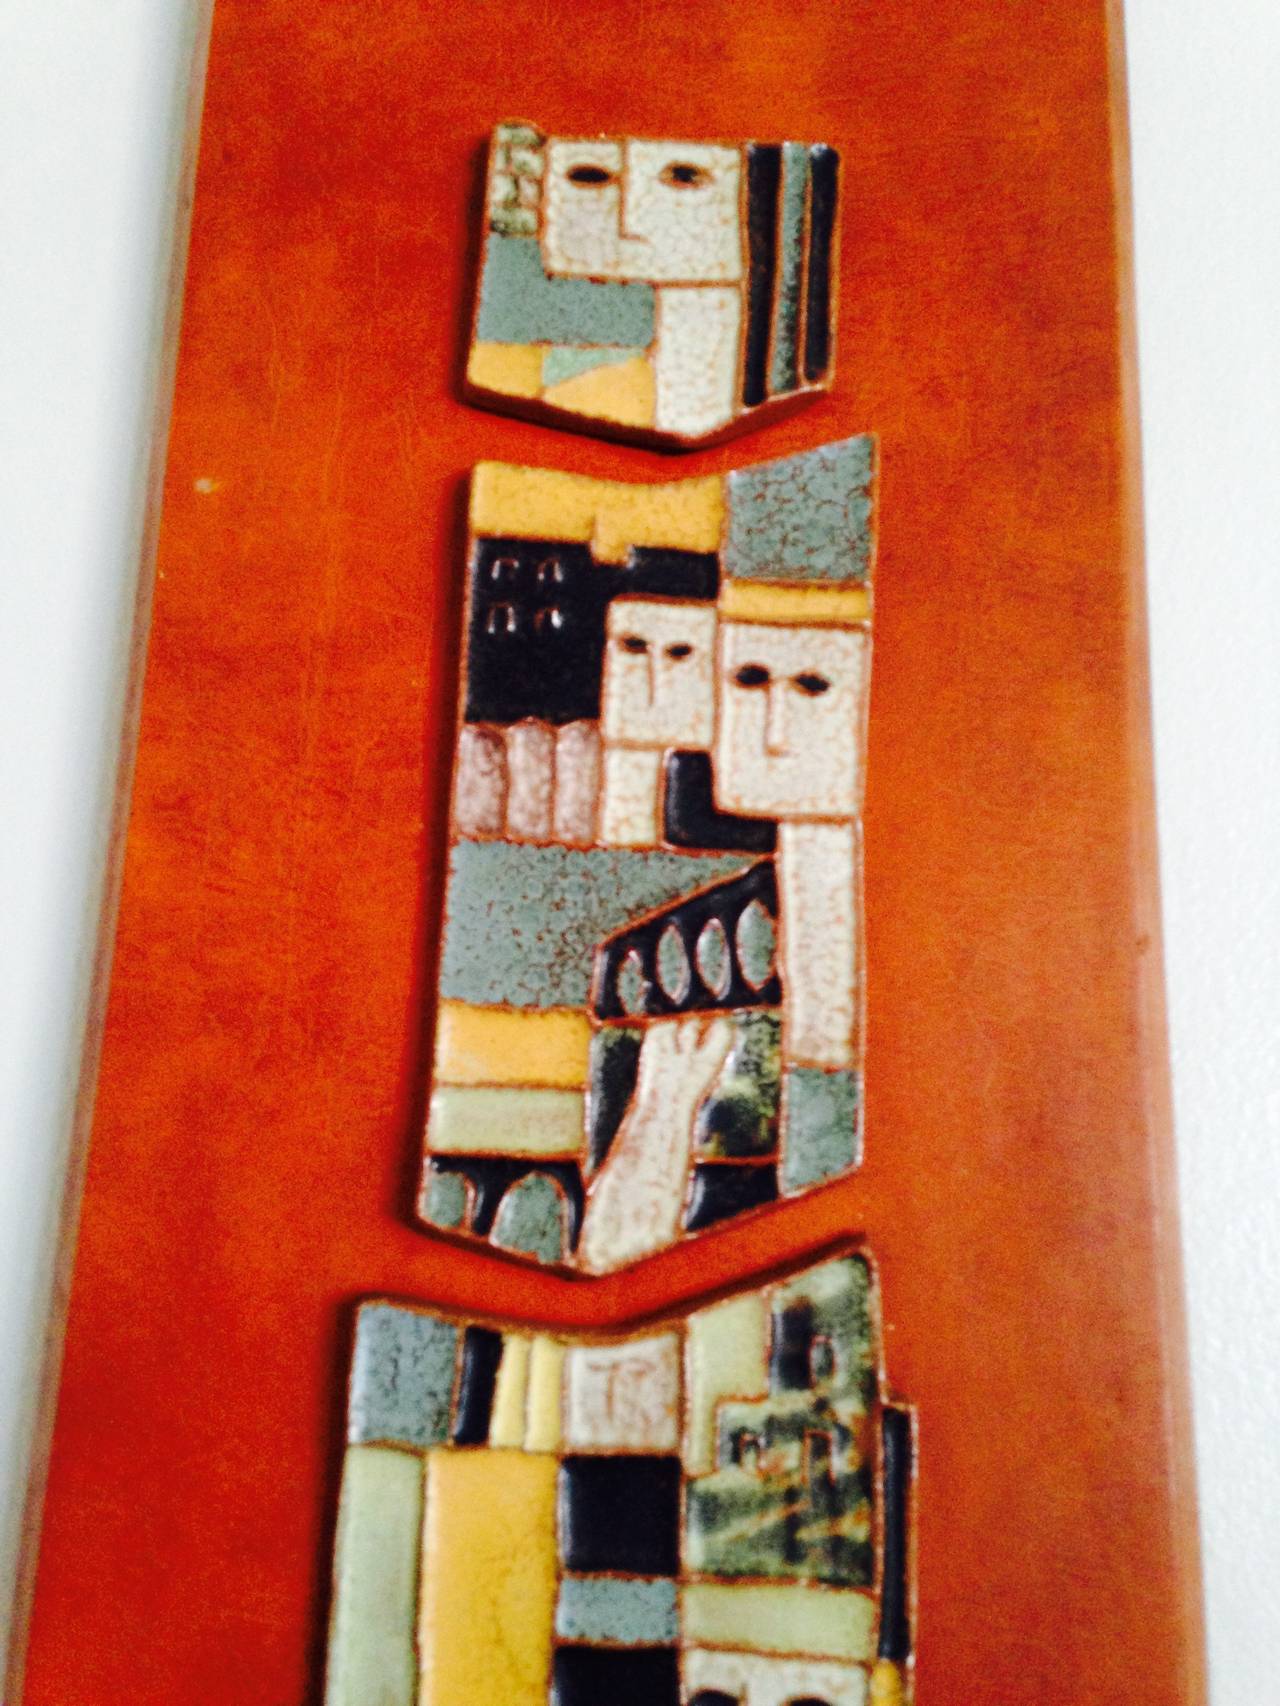 A great strong modernist design pair of ceramic plaques mounted on finished wood plaques created by Harris Strong the famed Mid-Century ceramicist. Nicely mounted with abstract figures these are a great wall accent for any Mid-Century Modern decor.